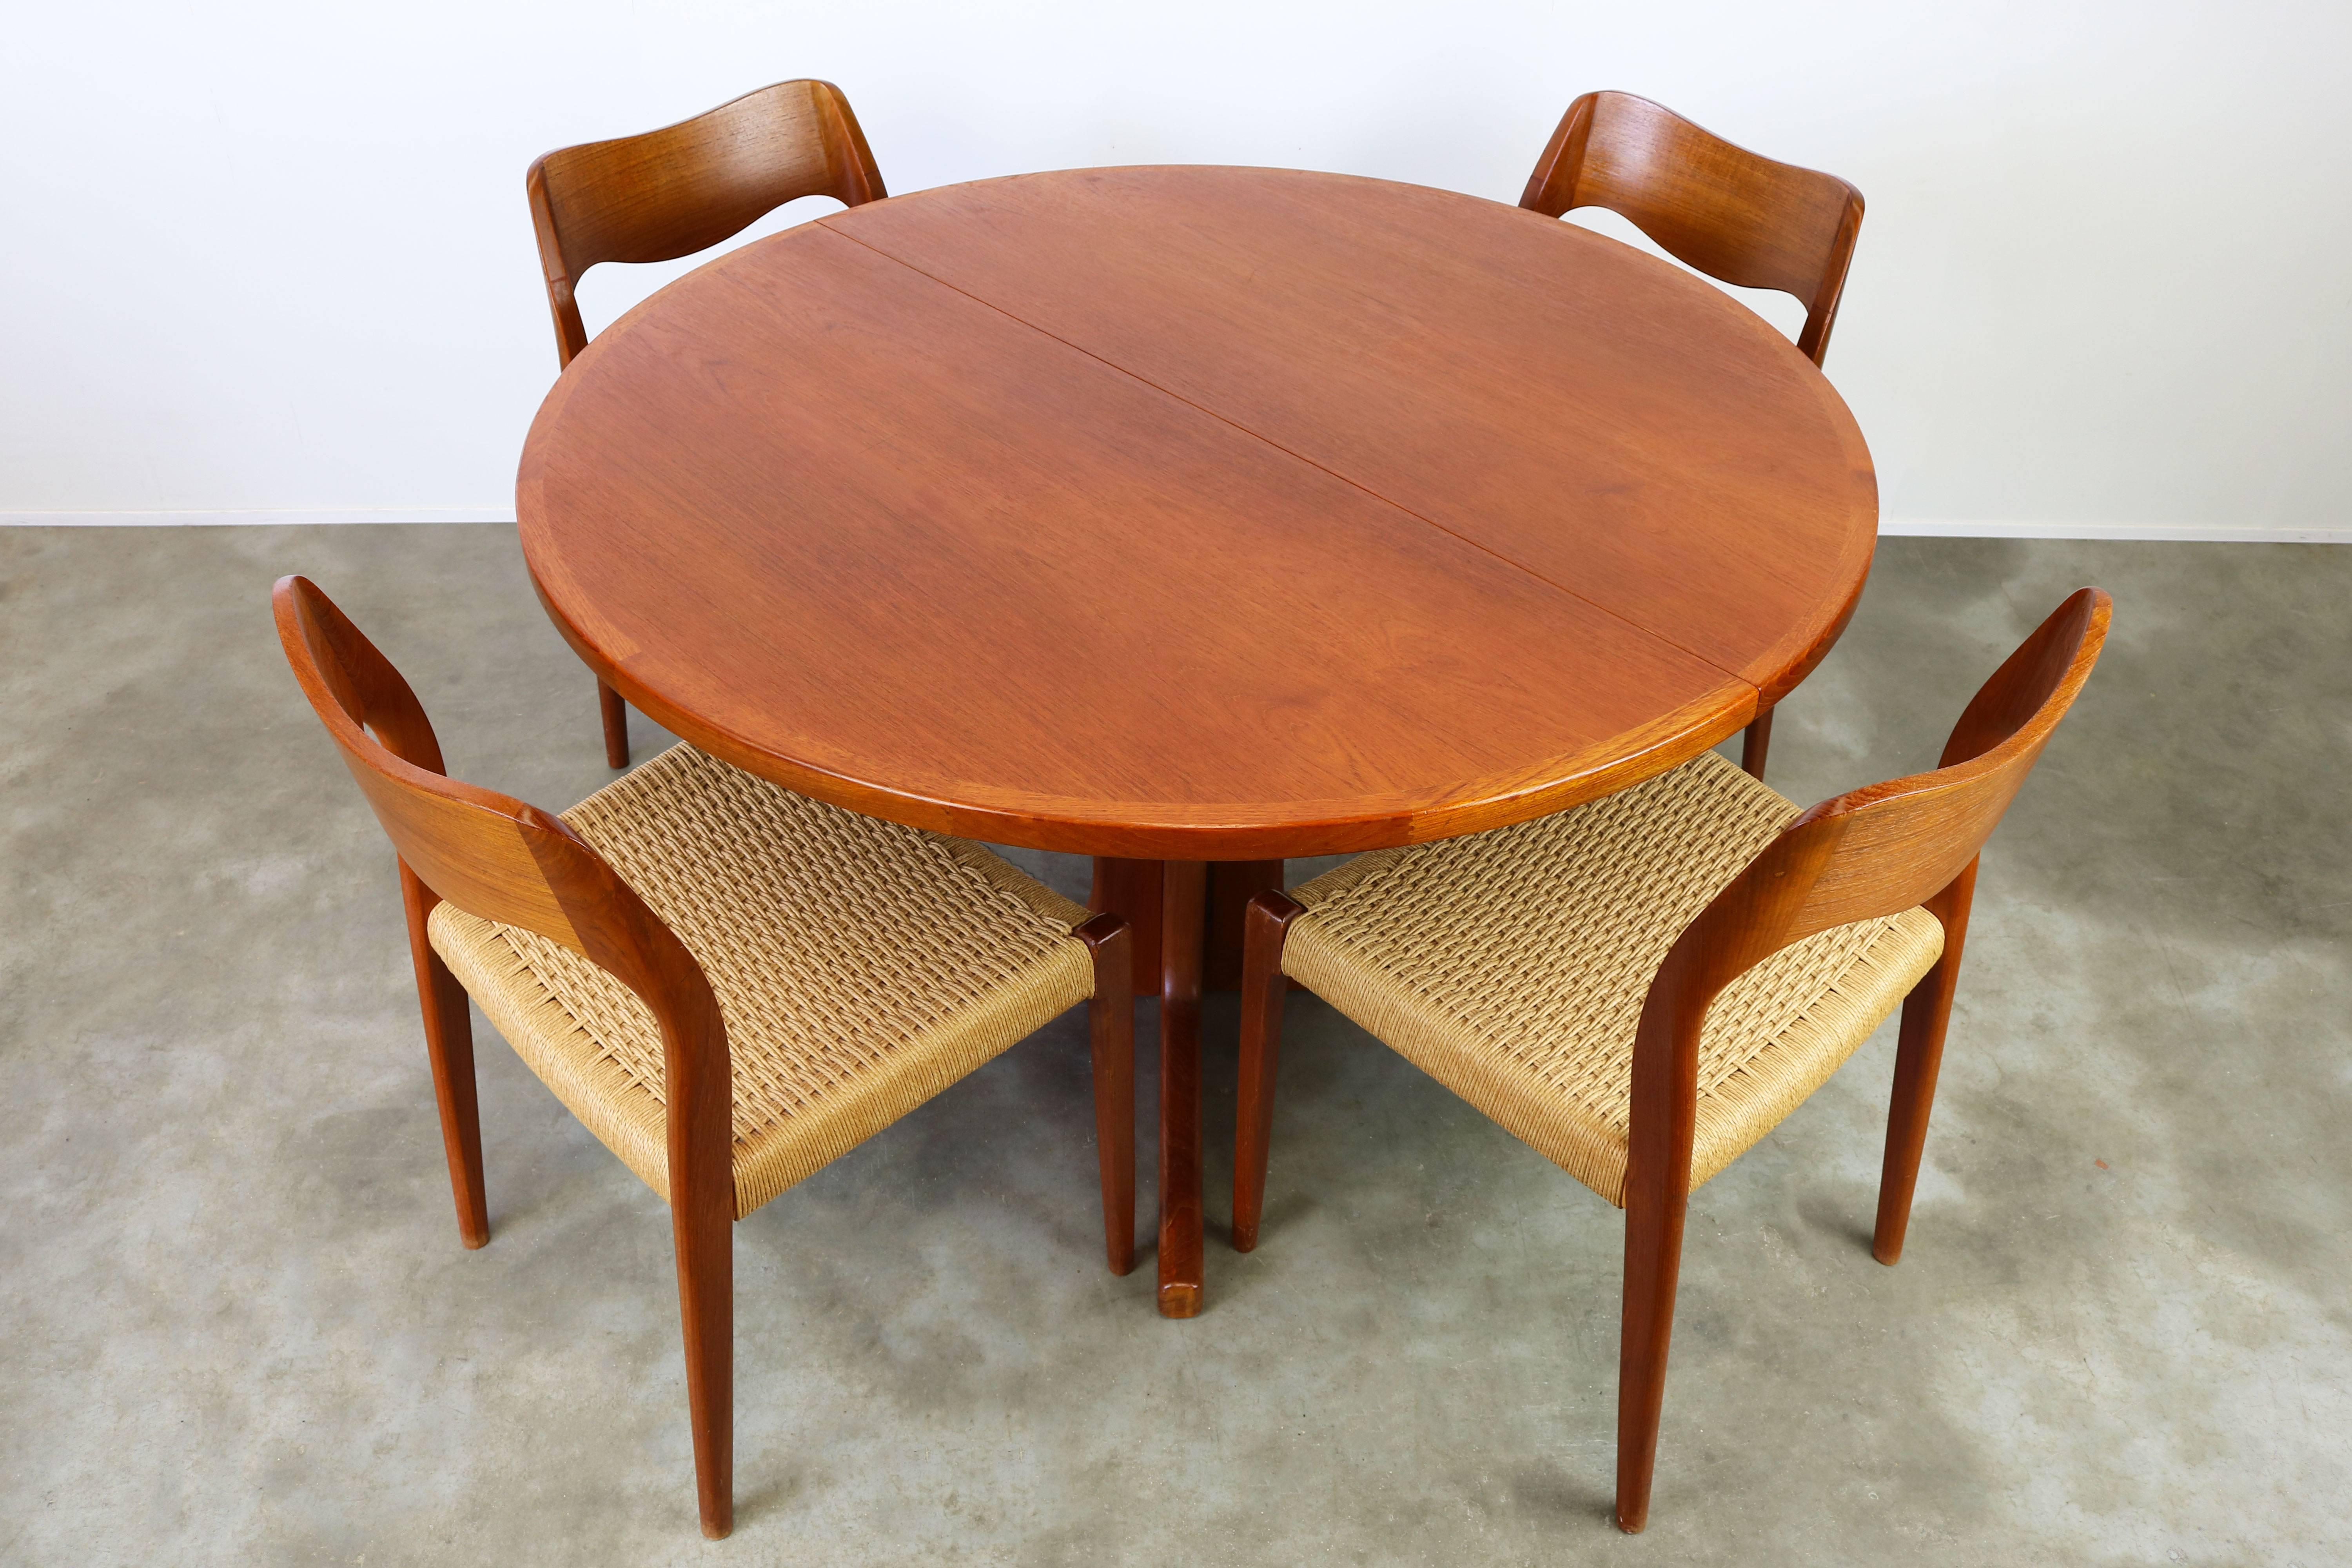 Magnificent Danish dining room set by Niels Otto Moller for JL Moller Mobelfabrik, 1950. The set consists of four teak and papercord model.71 chairs and original matching round teak table (extendable). Set is in wonderful original condition however